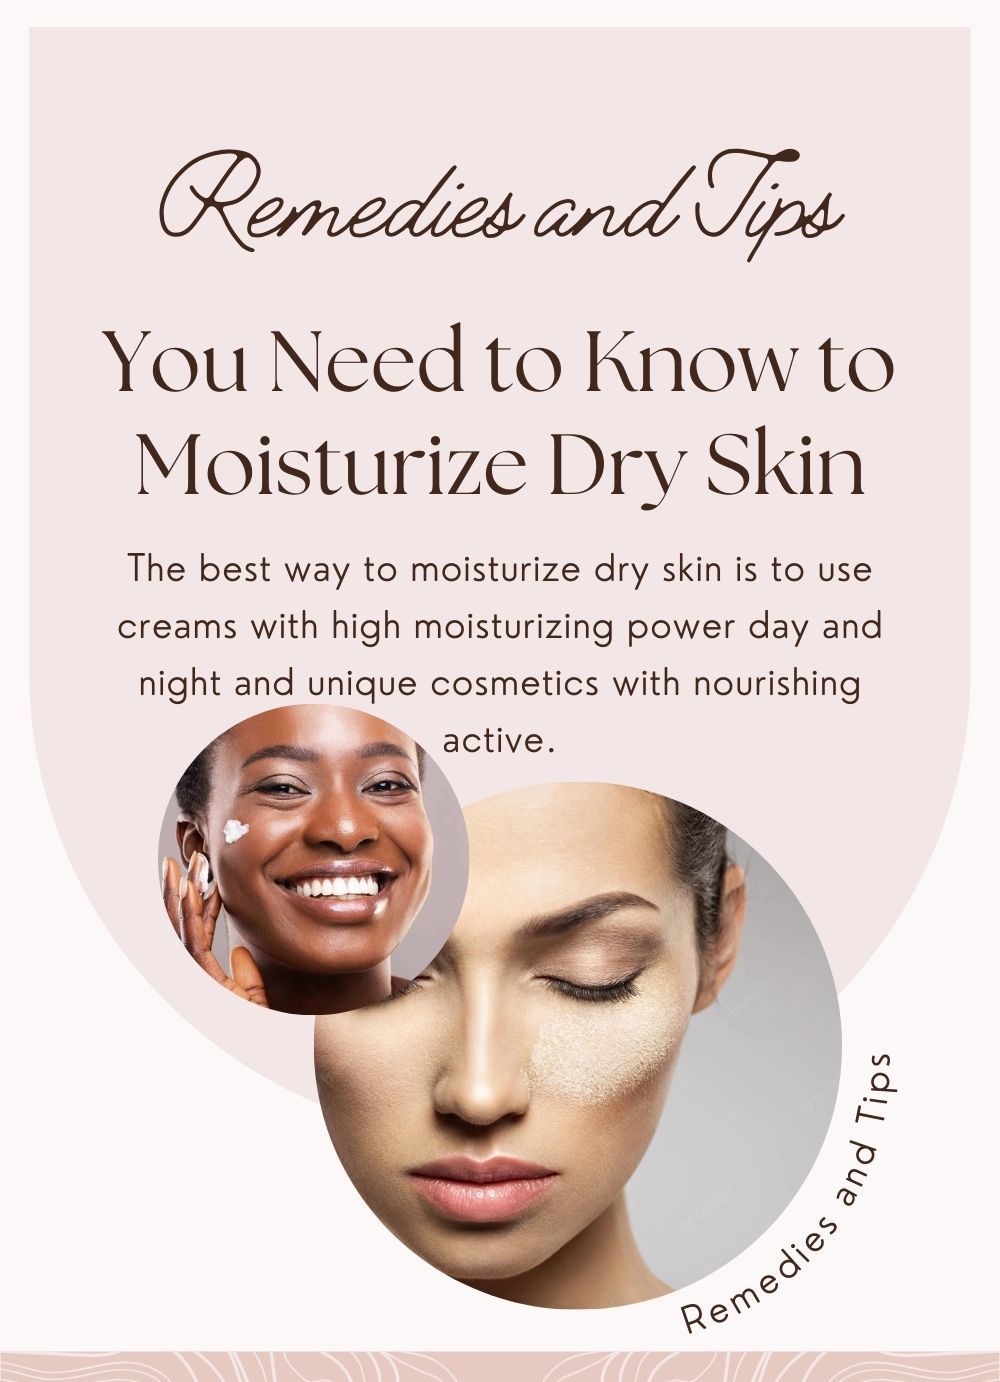 Tips You Need to Know to Moisturize Dry Skin